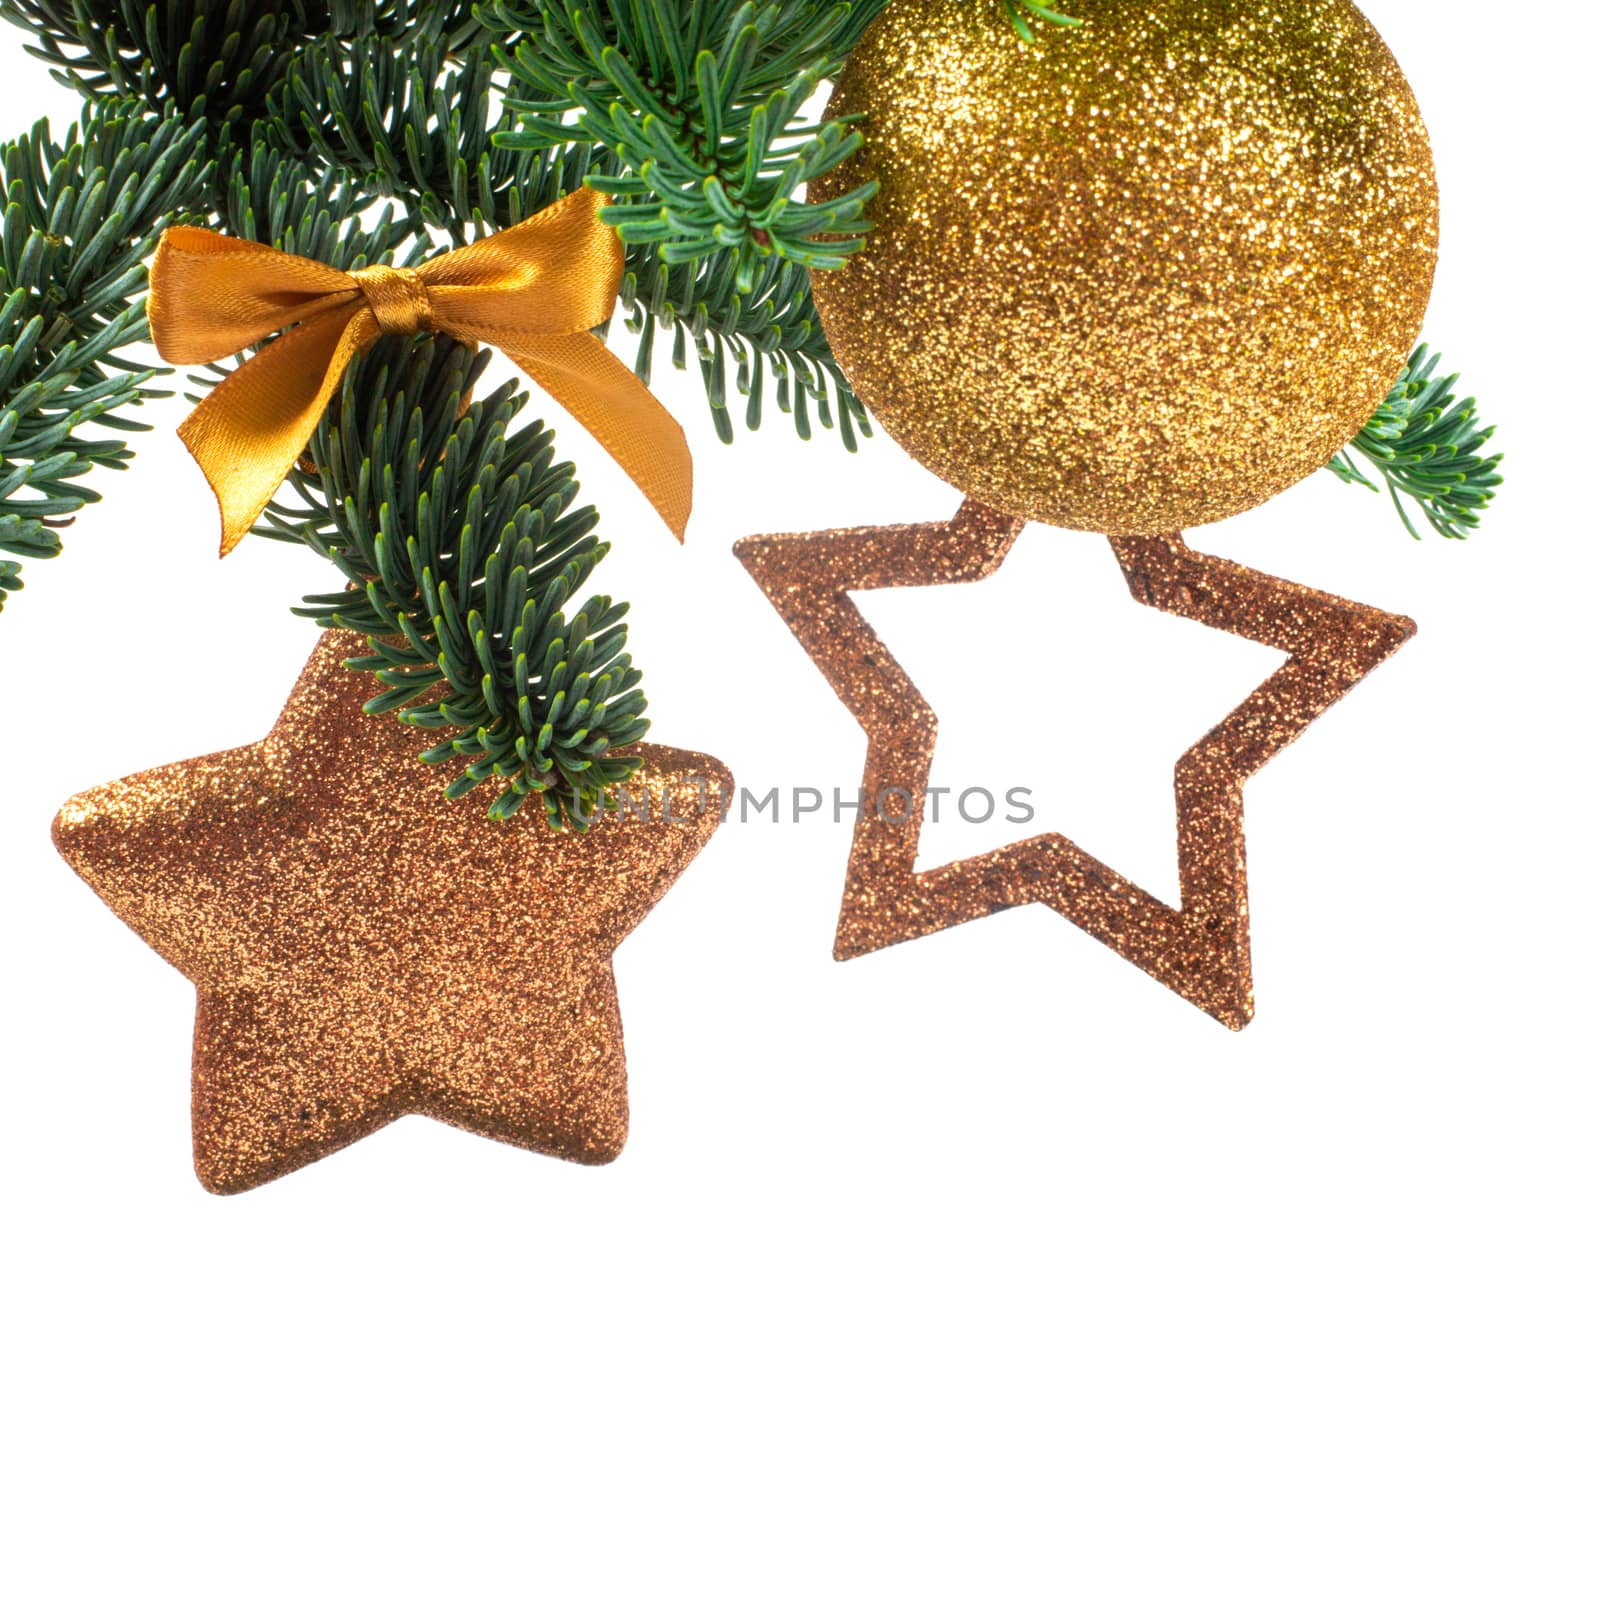 Christmas evergreen spruce noble fir tree and golden glitter glass bauble balls and stars isolated on white background